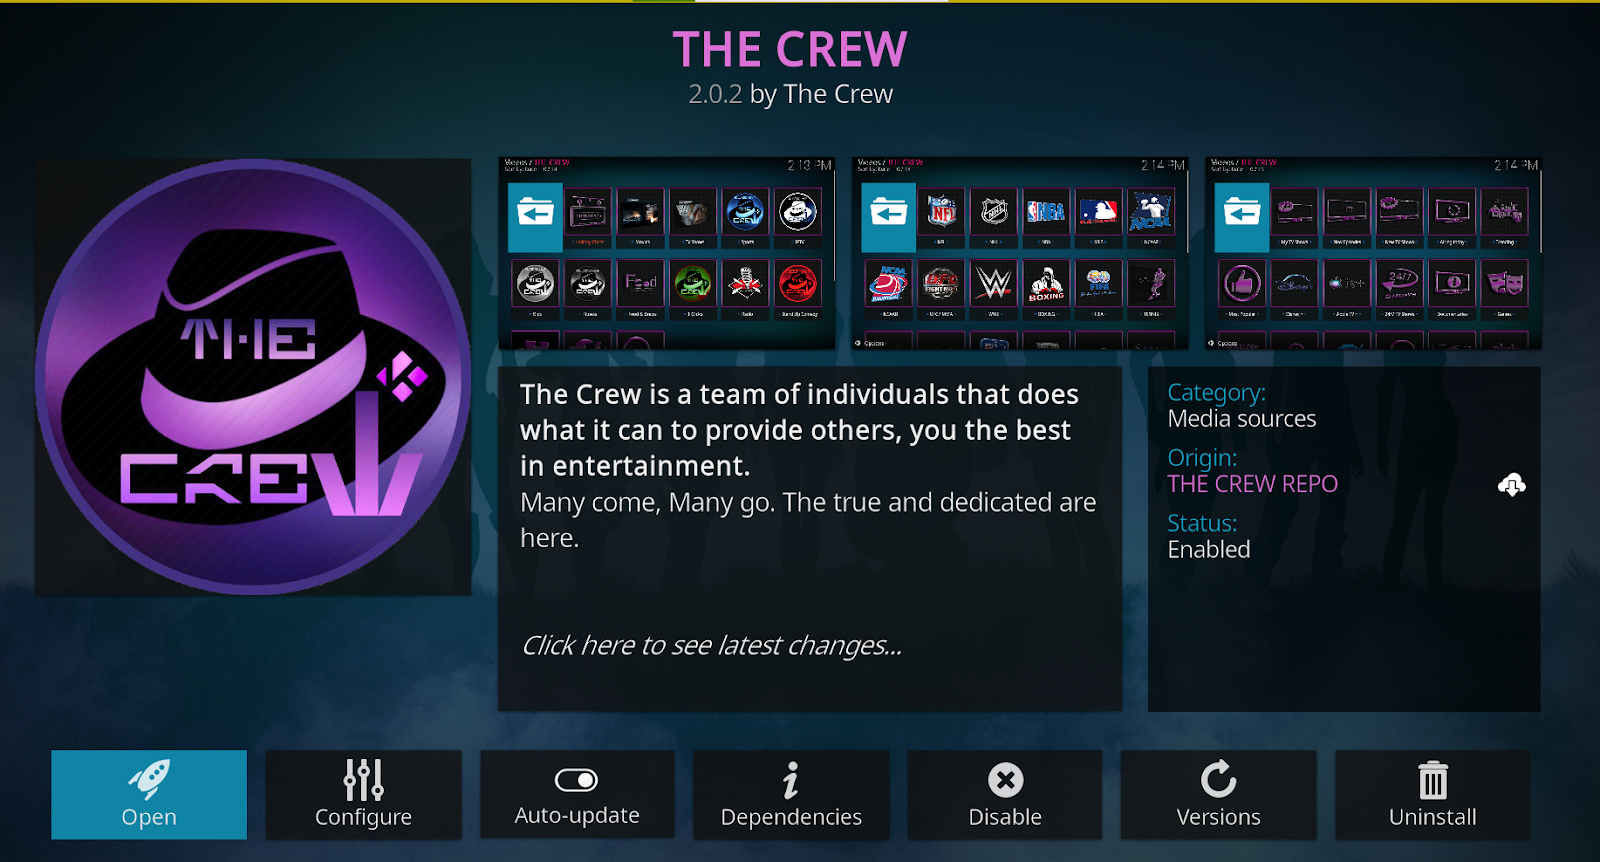 The Crew Kodi Add-on interface with the Open button highlighted in blue